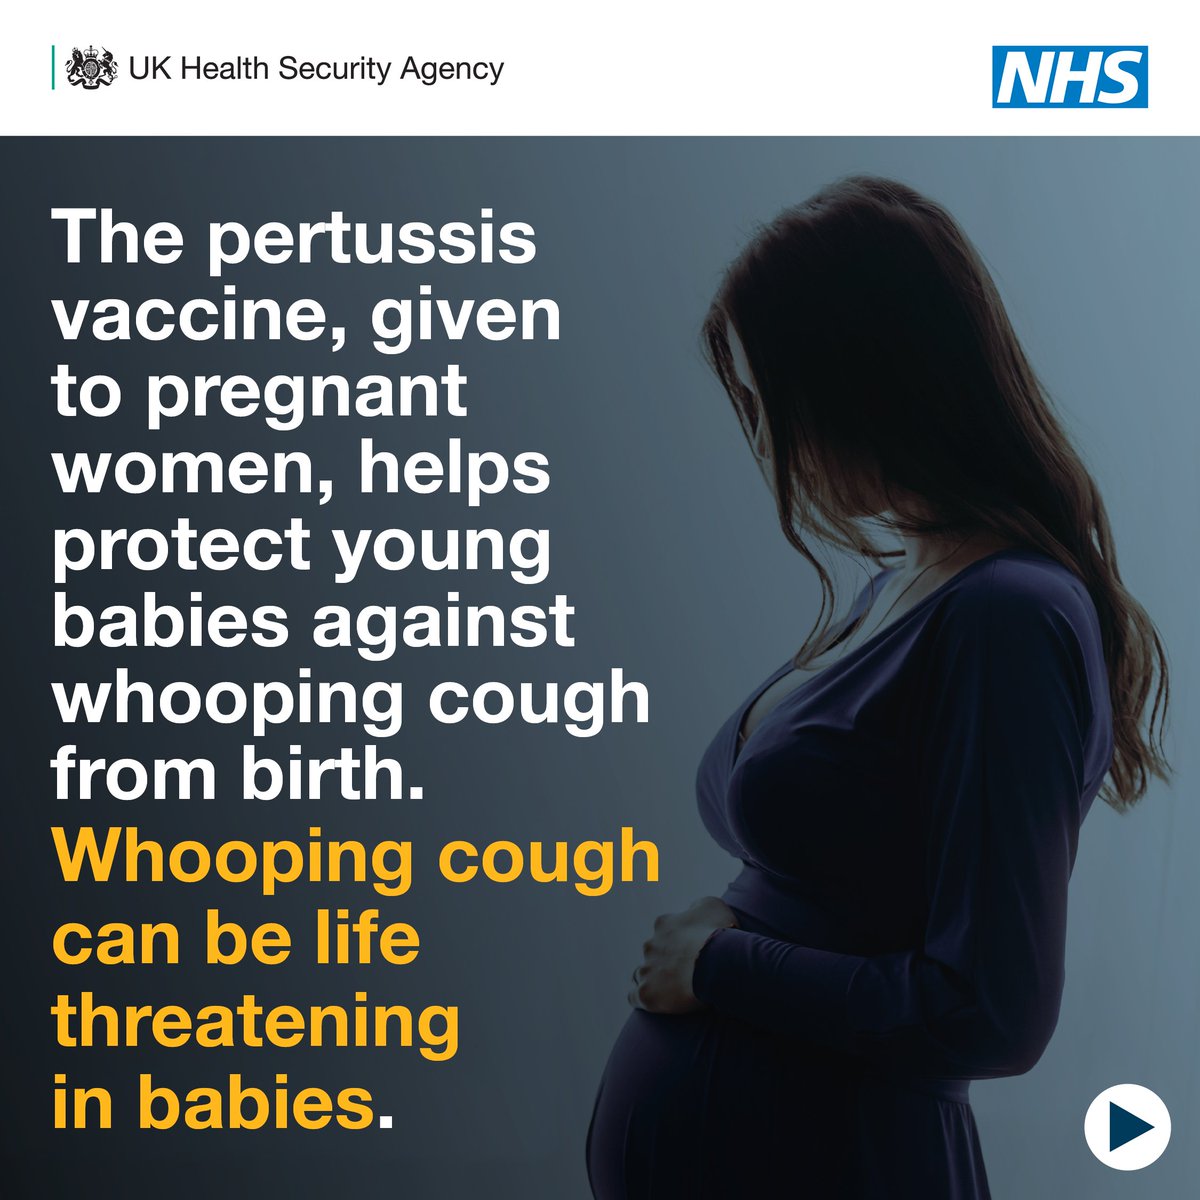 Whooping cough (pertussis) cases are currently very high, & the disease can be life-threatening for newborn babies. If you're pregnant, it's important to take up the #Pertussisvaccine when offered. It helps protect your baby in their first weeks of life ukhsa.blog.gov.uk/2024/04/12/wha…